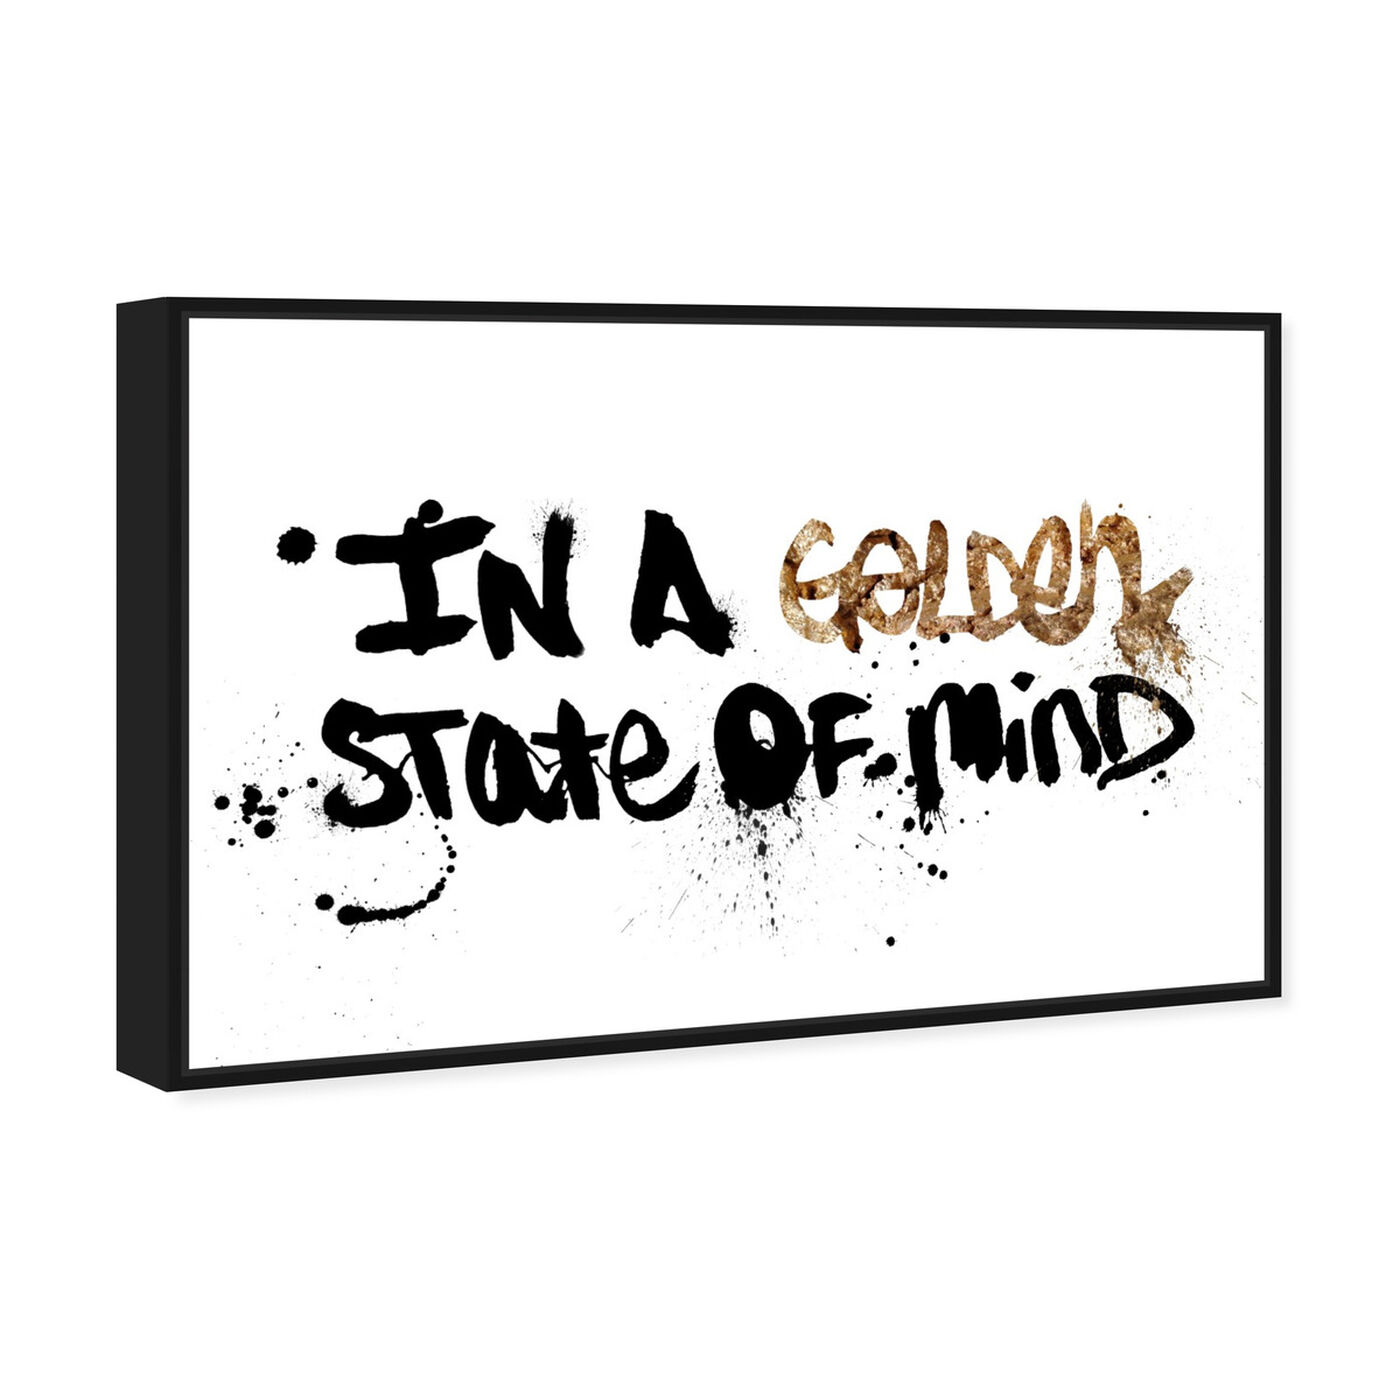 Angled view of State of Mind featuring typography and quotes and motivational quotes and sayings art.